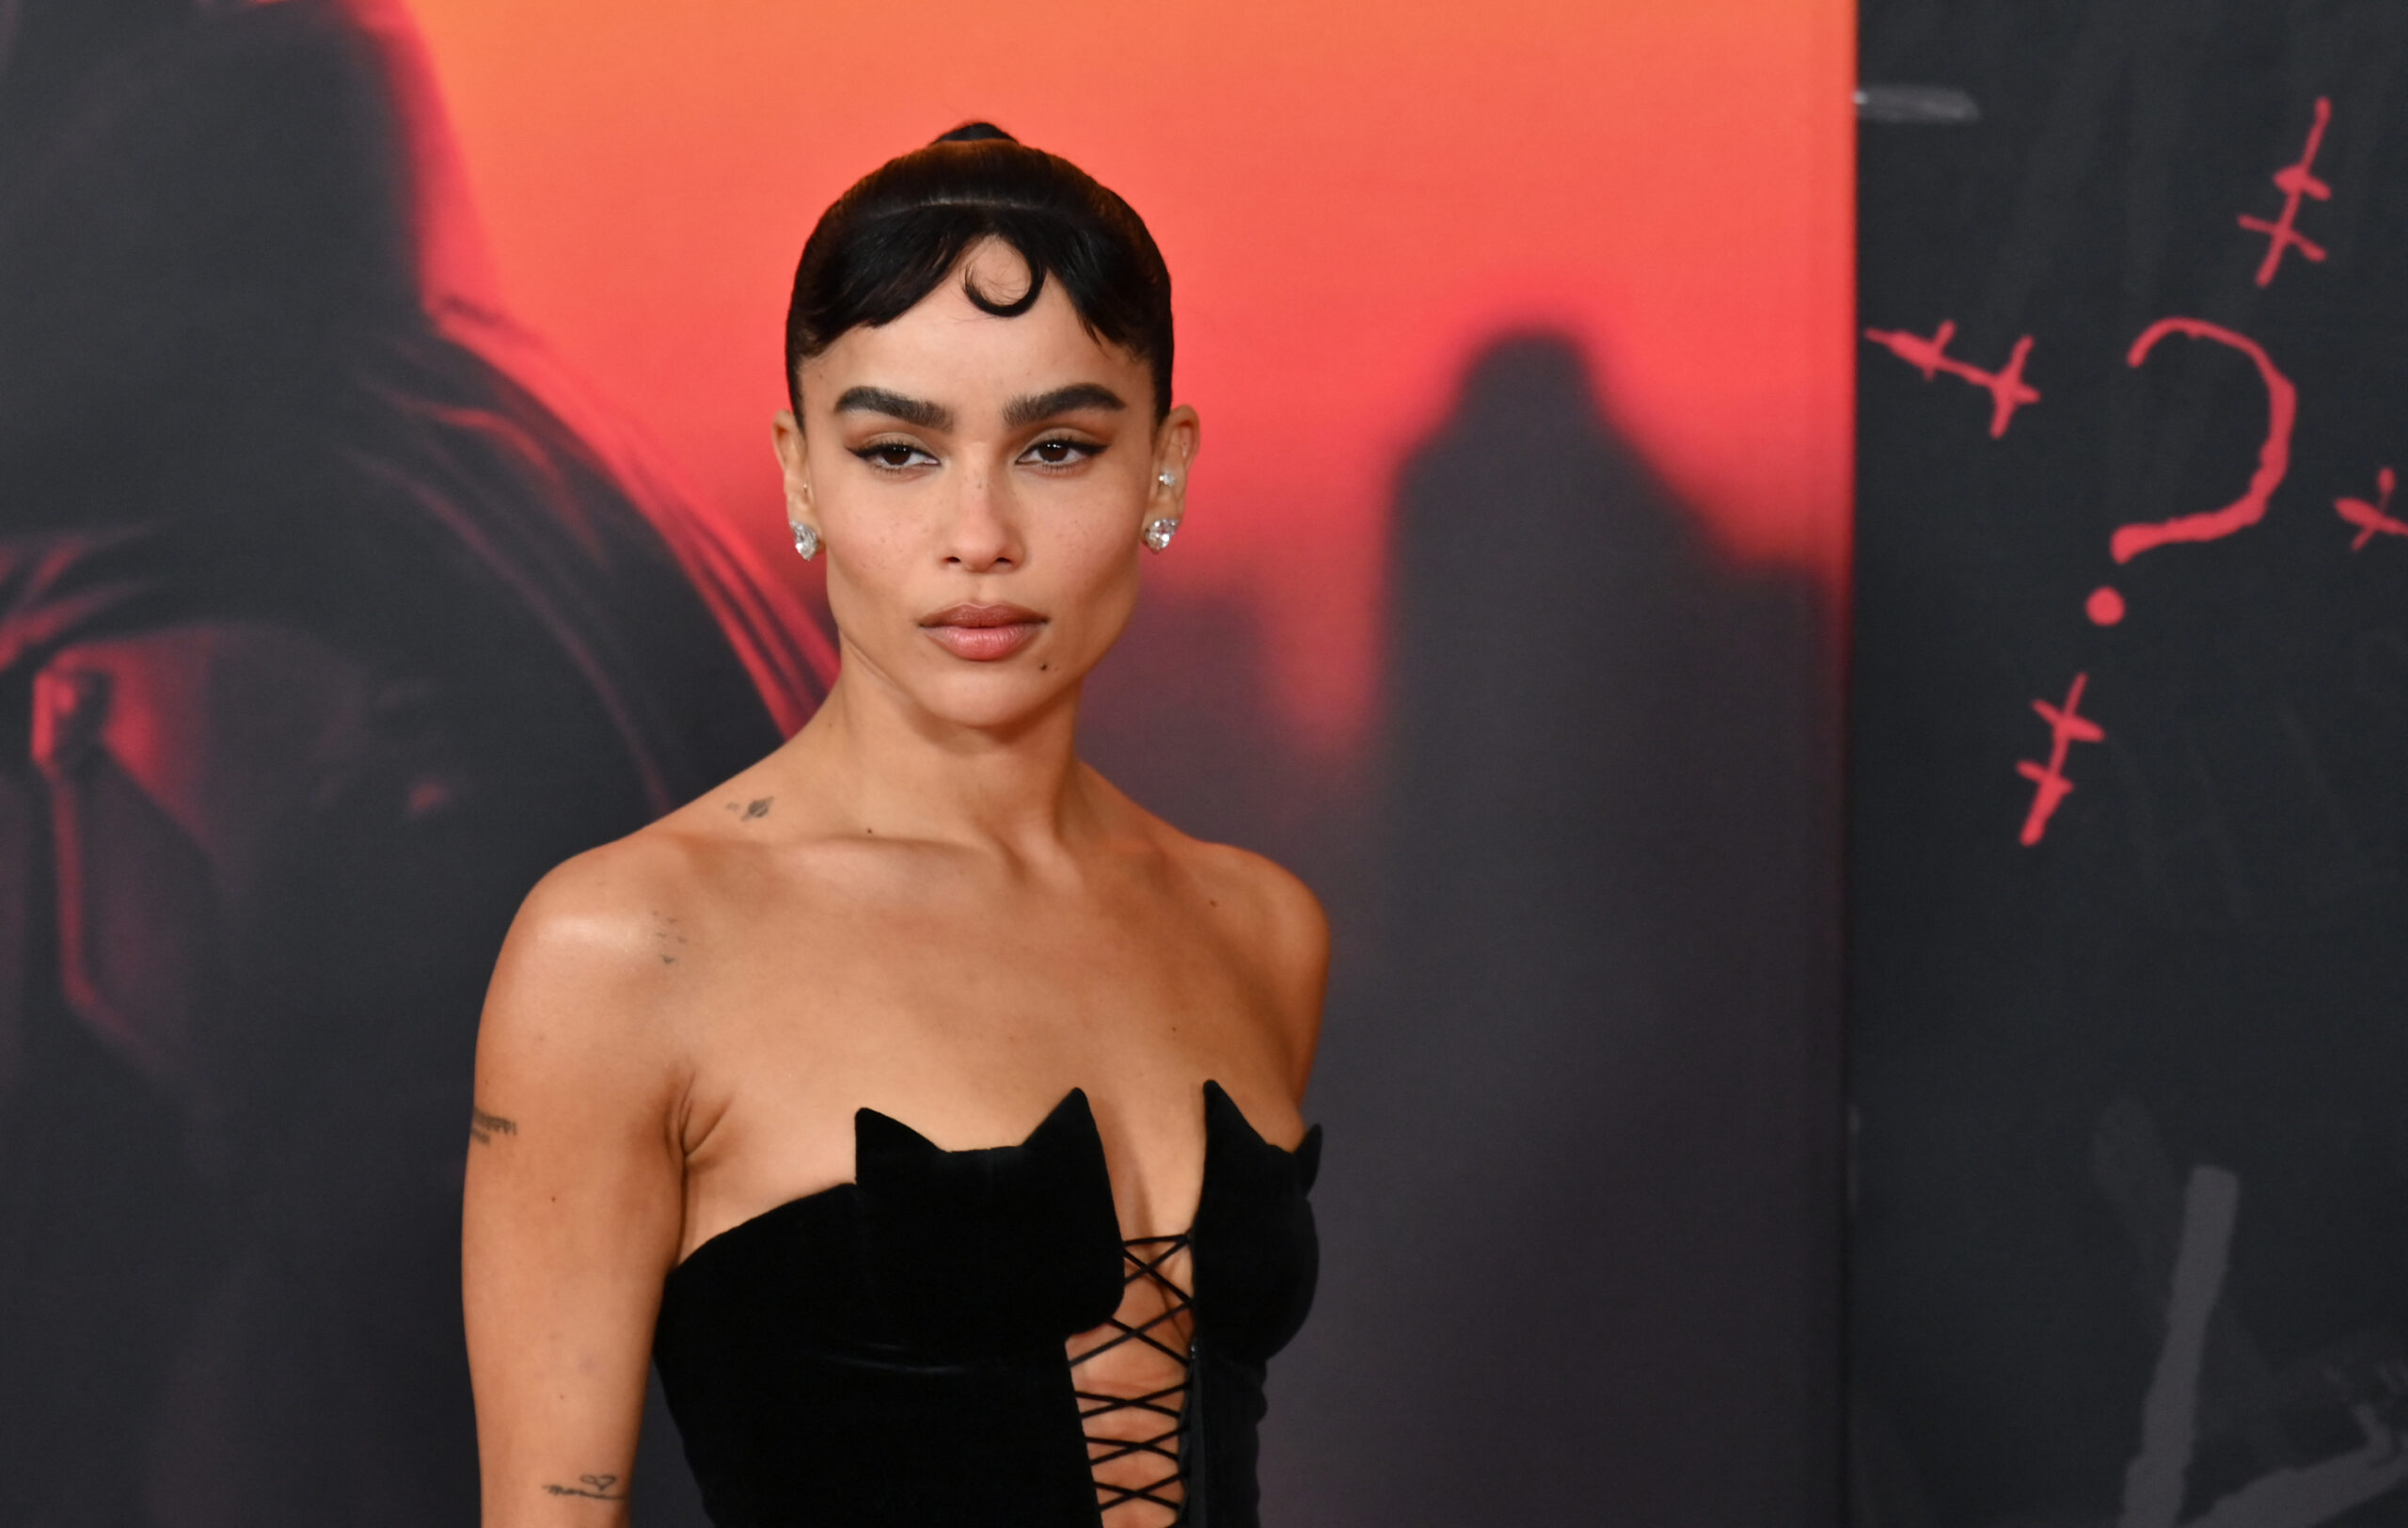 The Batman Star Zoë Kravitz Says She Was Rejected From The Dark Knight Rises for Being Too ‘Urban’